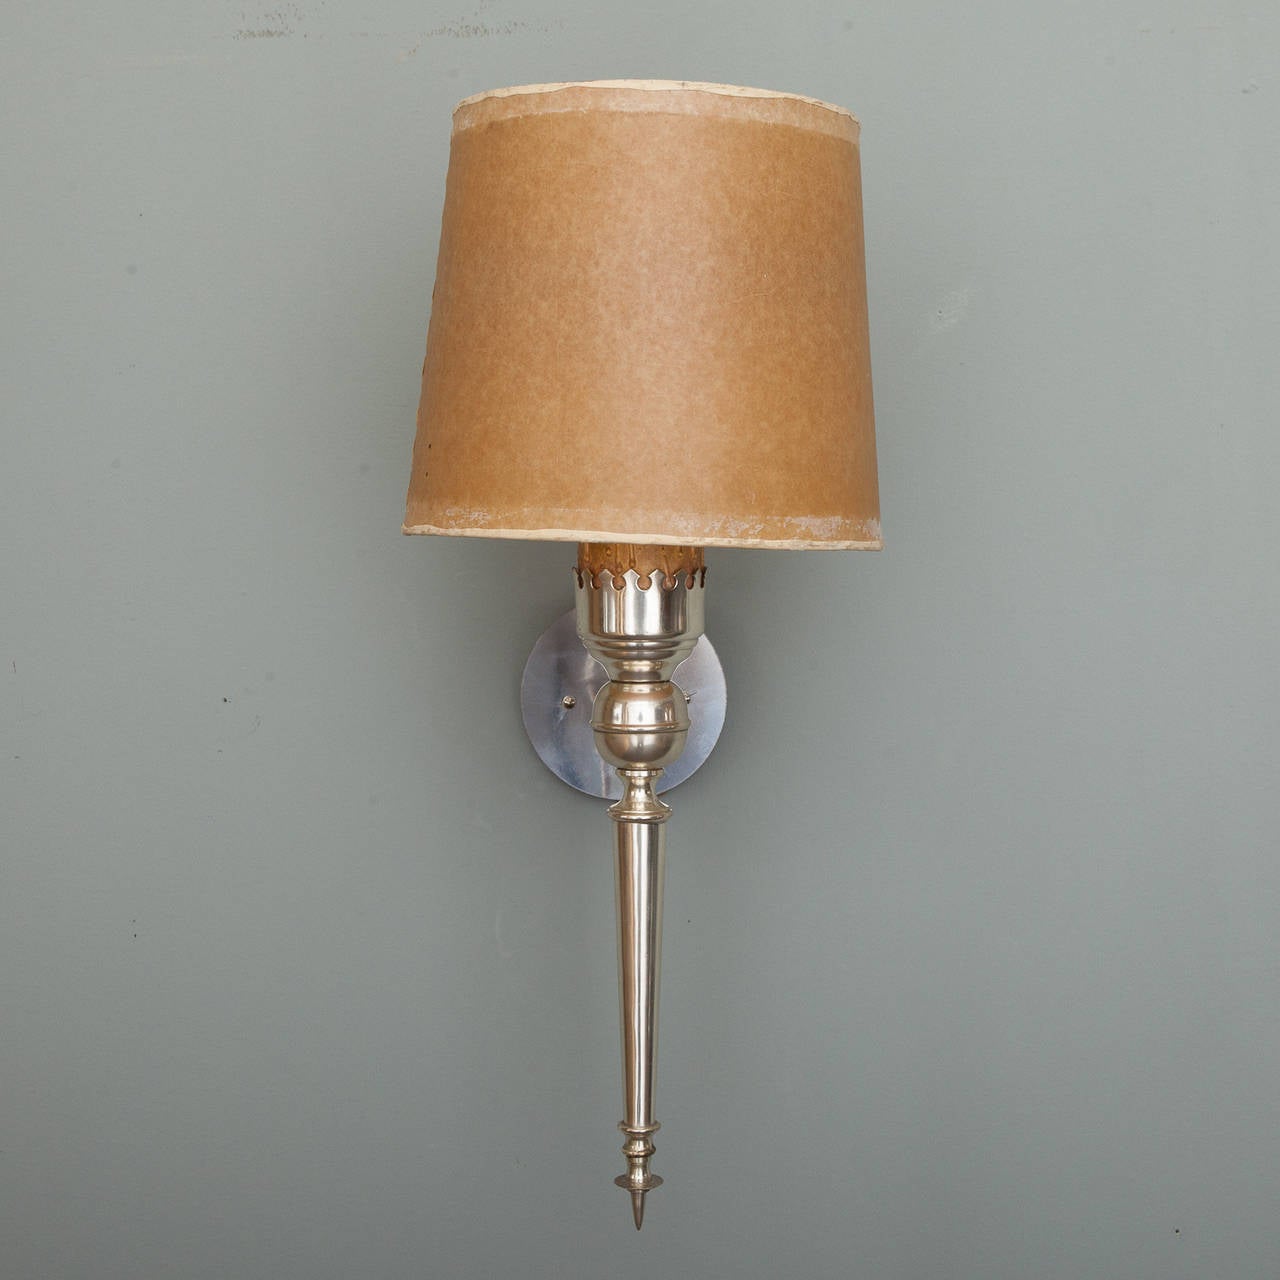 Circa 1940s Italian sconces with neoclassical form, silver tone metal, round back plates and original vintage shades. New wiring for US electrical standards. Sold and priced as a pair. Measurements shown include shade. Several pairs available -